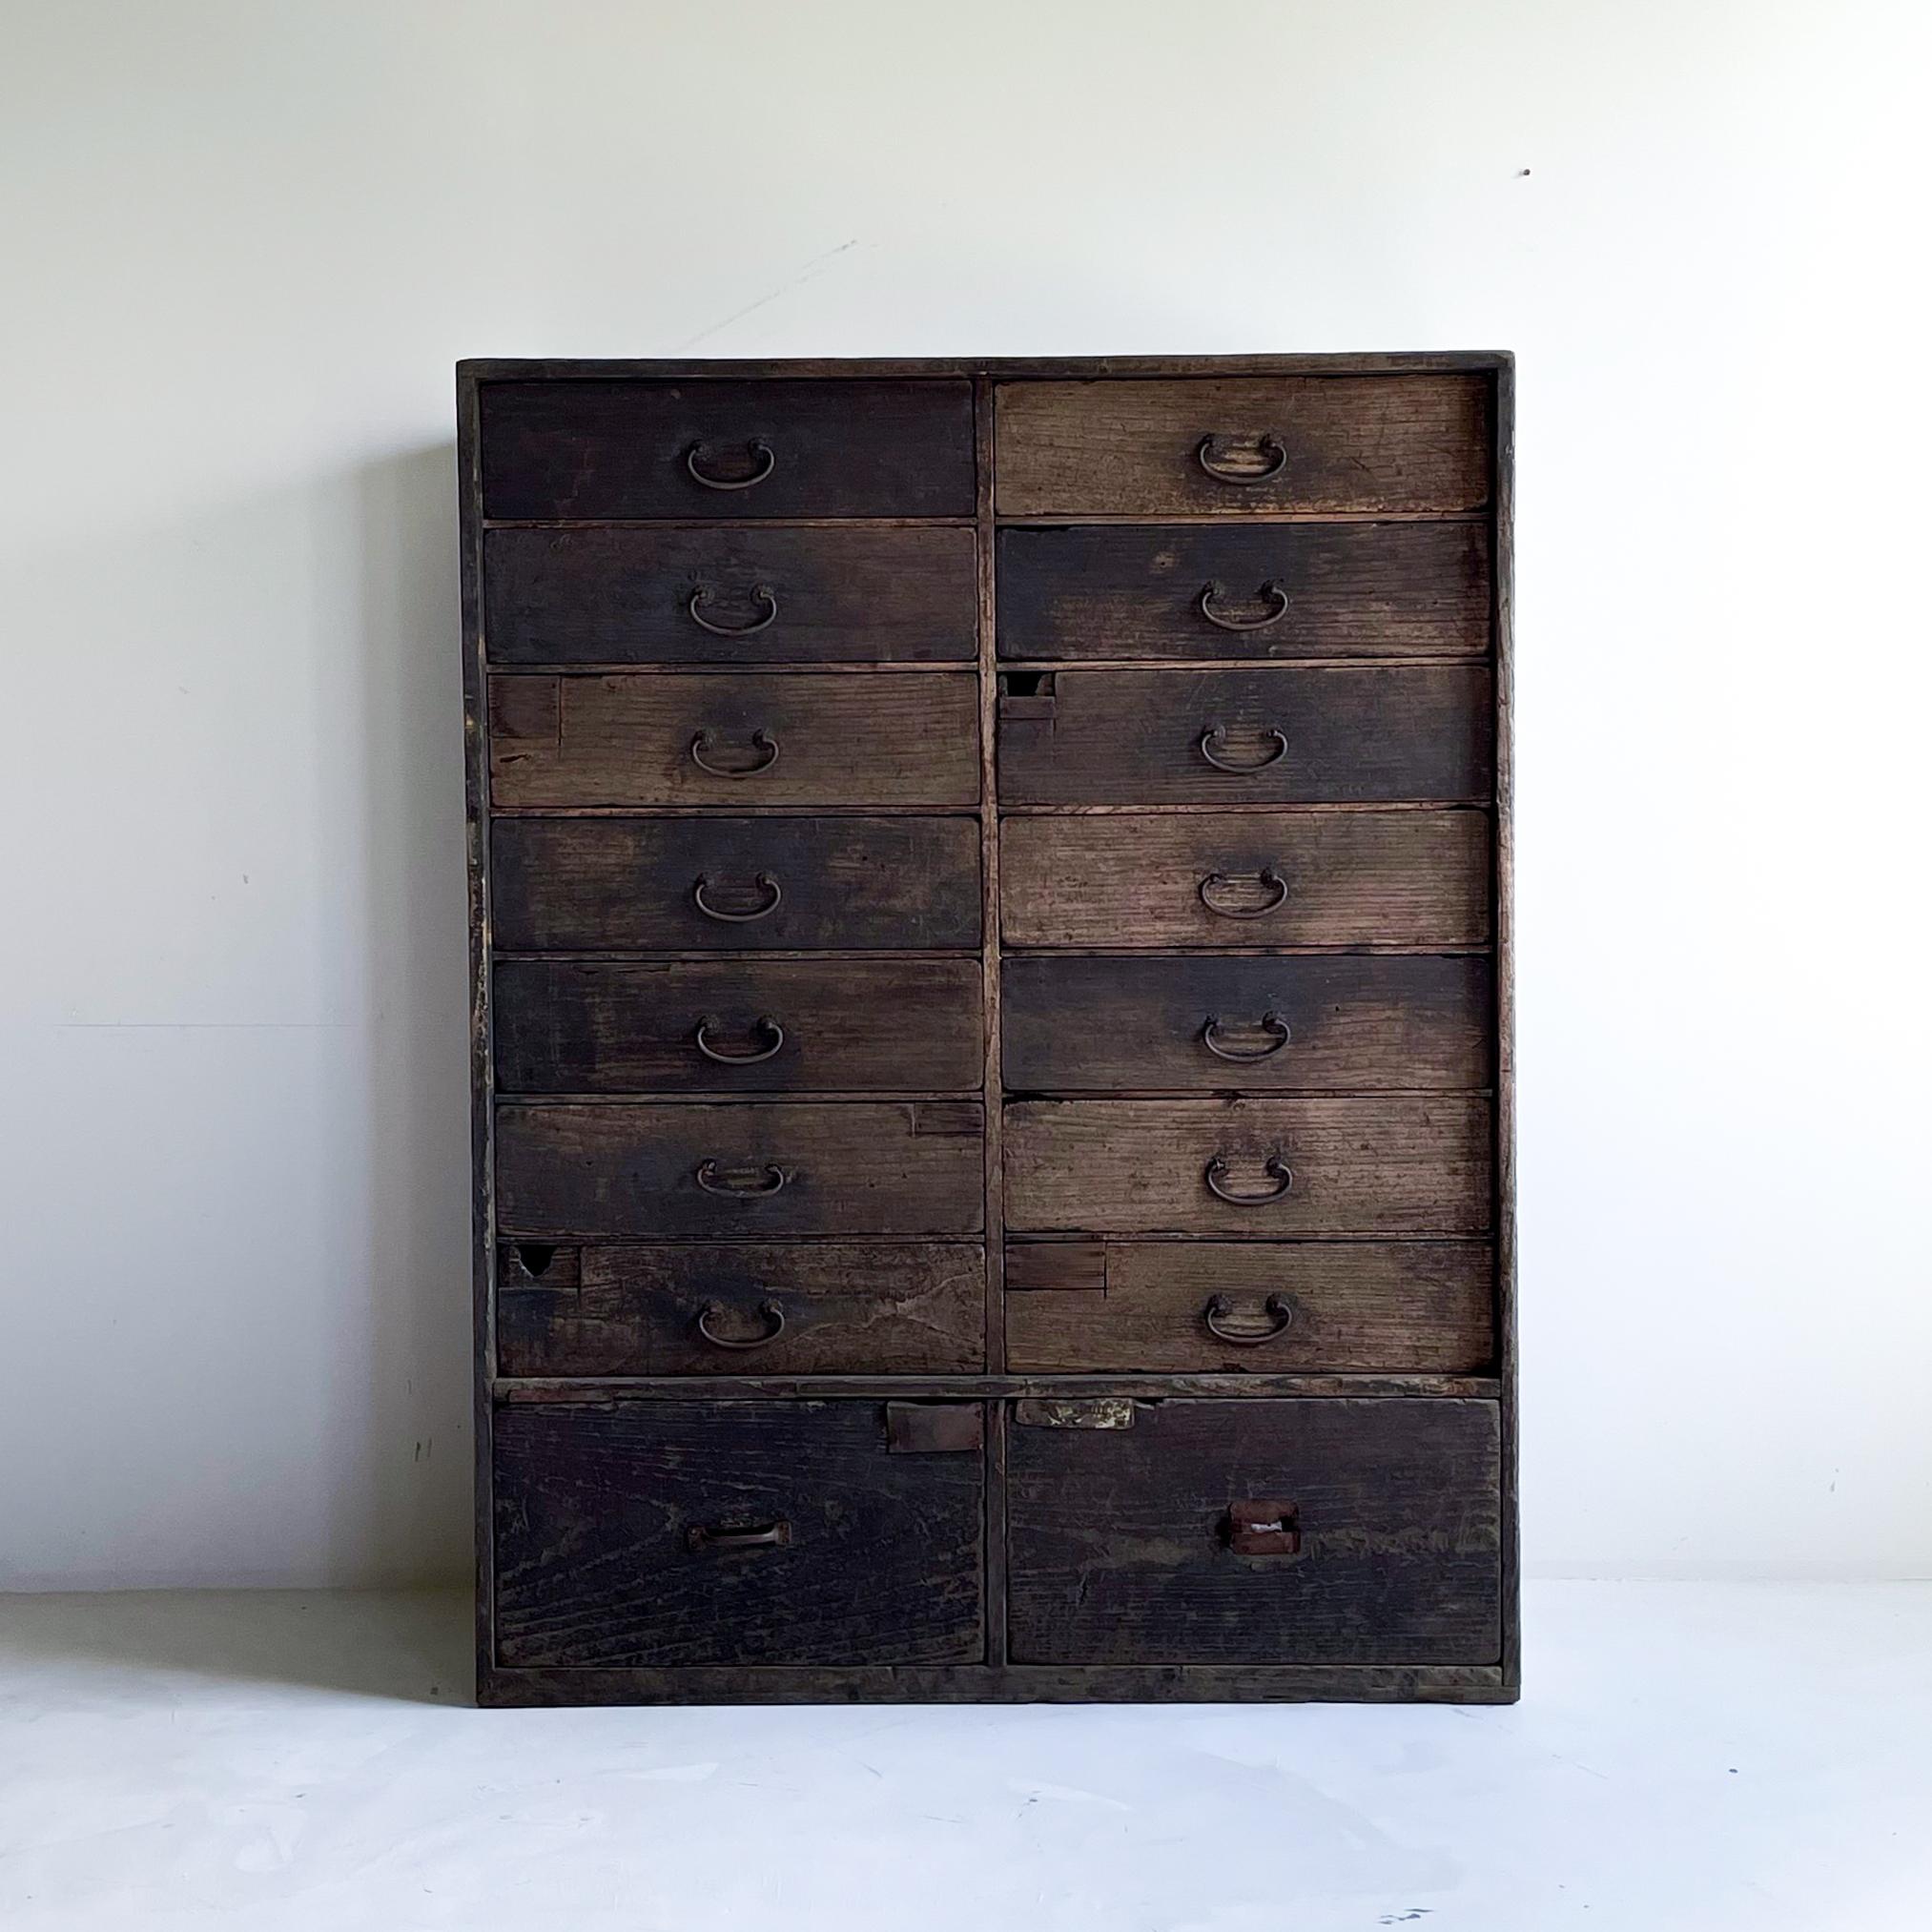 Very old Japanese drawer storage.
The furniture dates from the Meiji period (1860s-1900s).
It is made of paulownia wood.
The metal fittings on the handles are made of iron.

The design is uniquely Japanese, rustic and lean.
It is the ultimate in